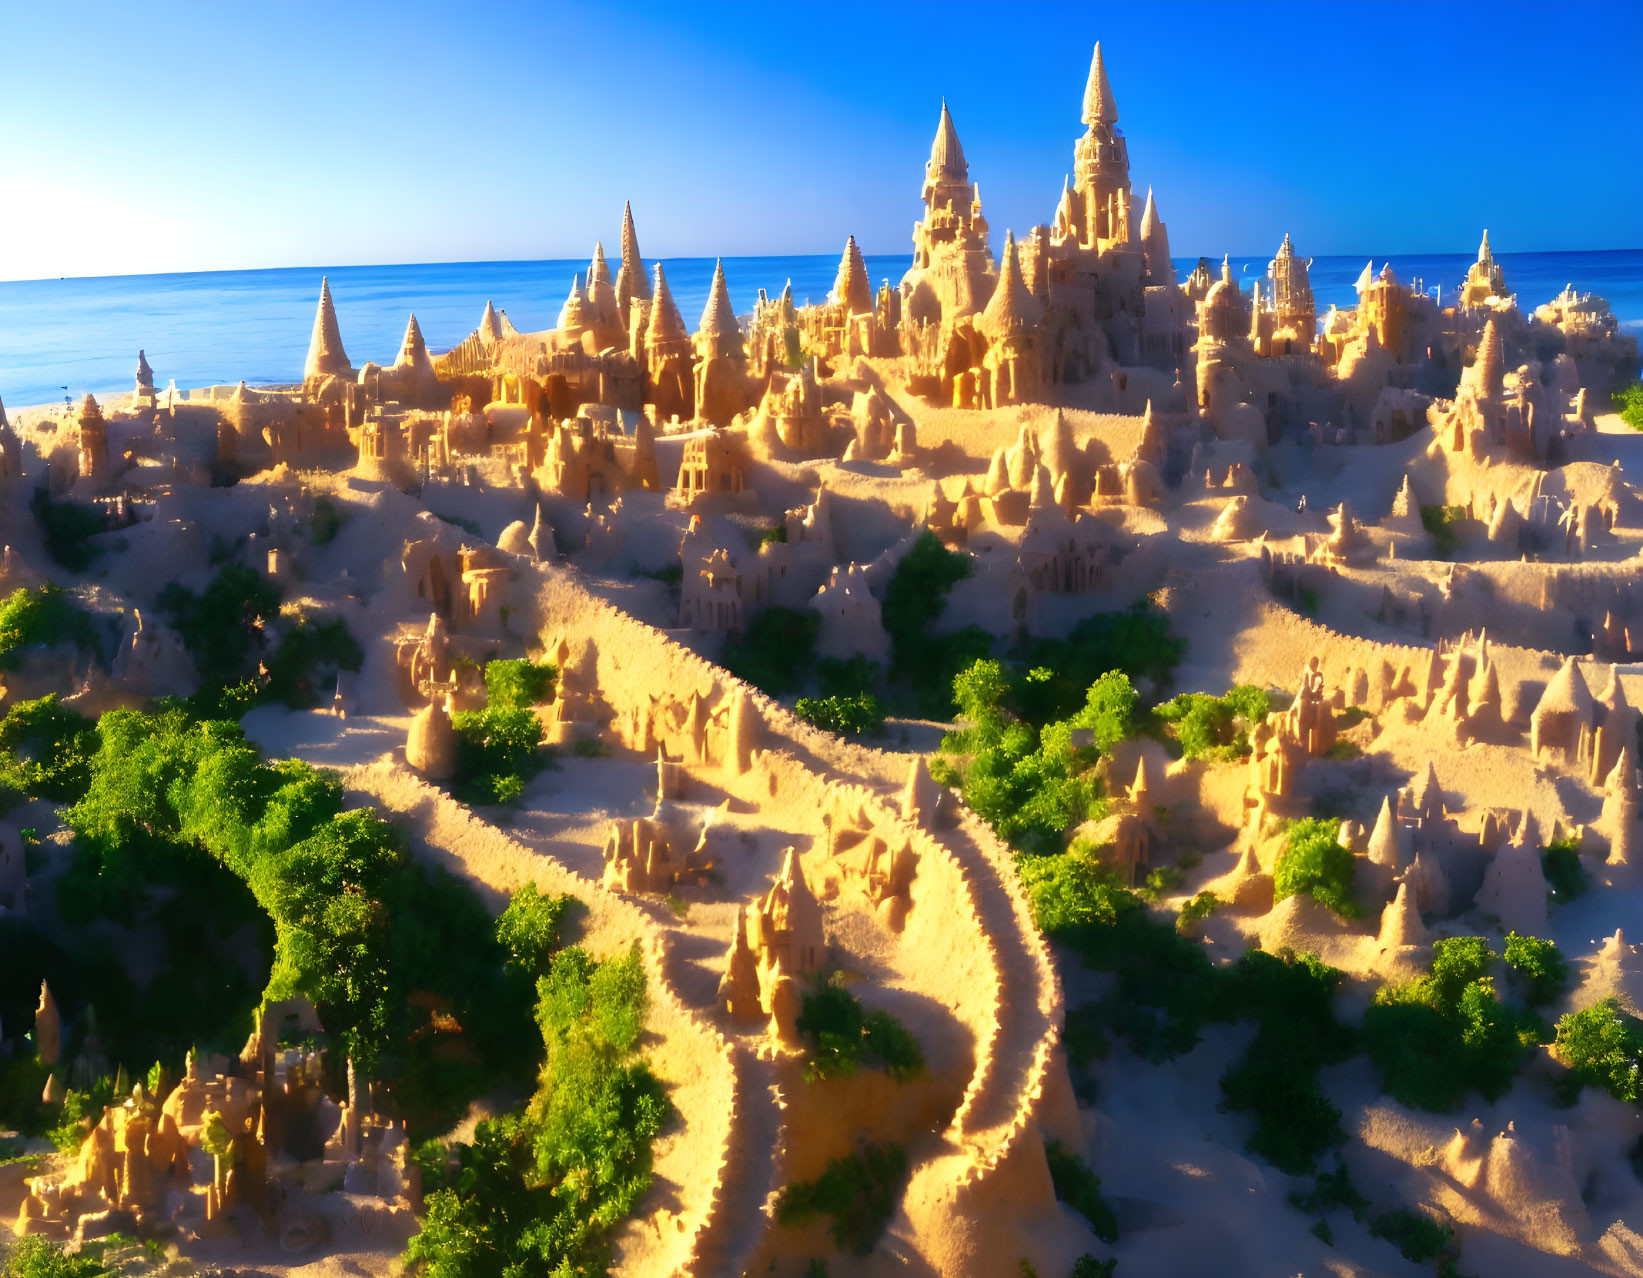 Sandcastle City with Towers and Pathways at Sunset Overlooking Ocean